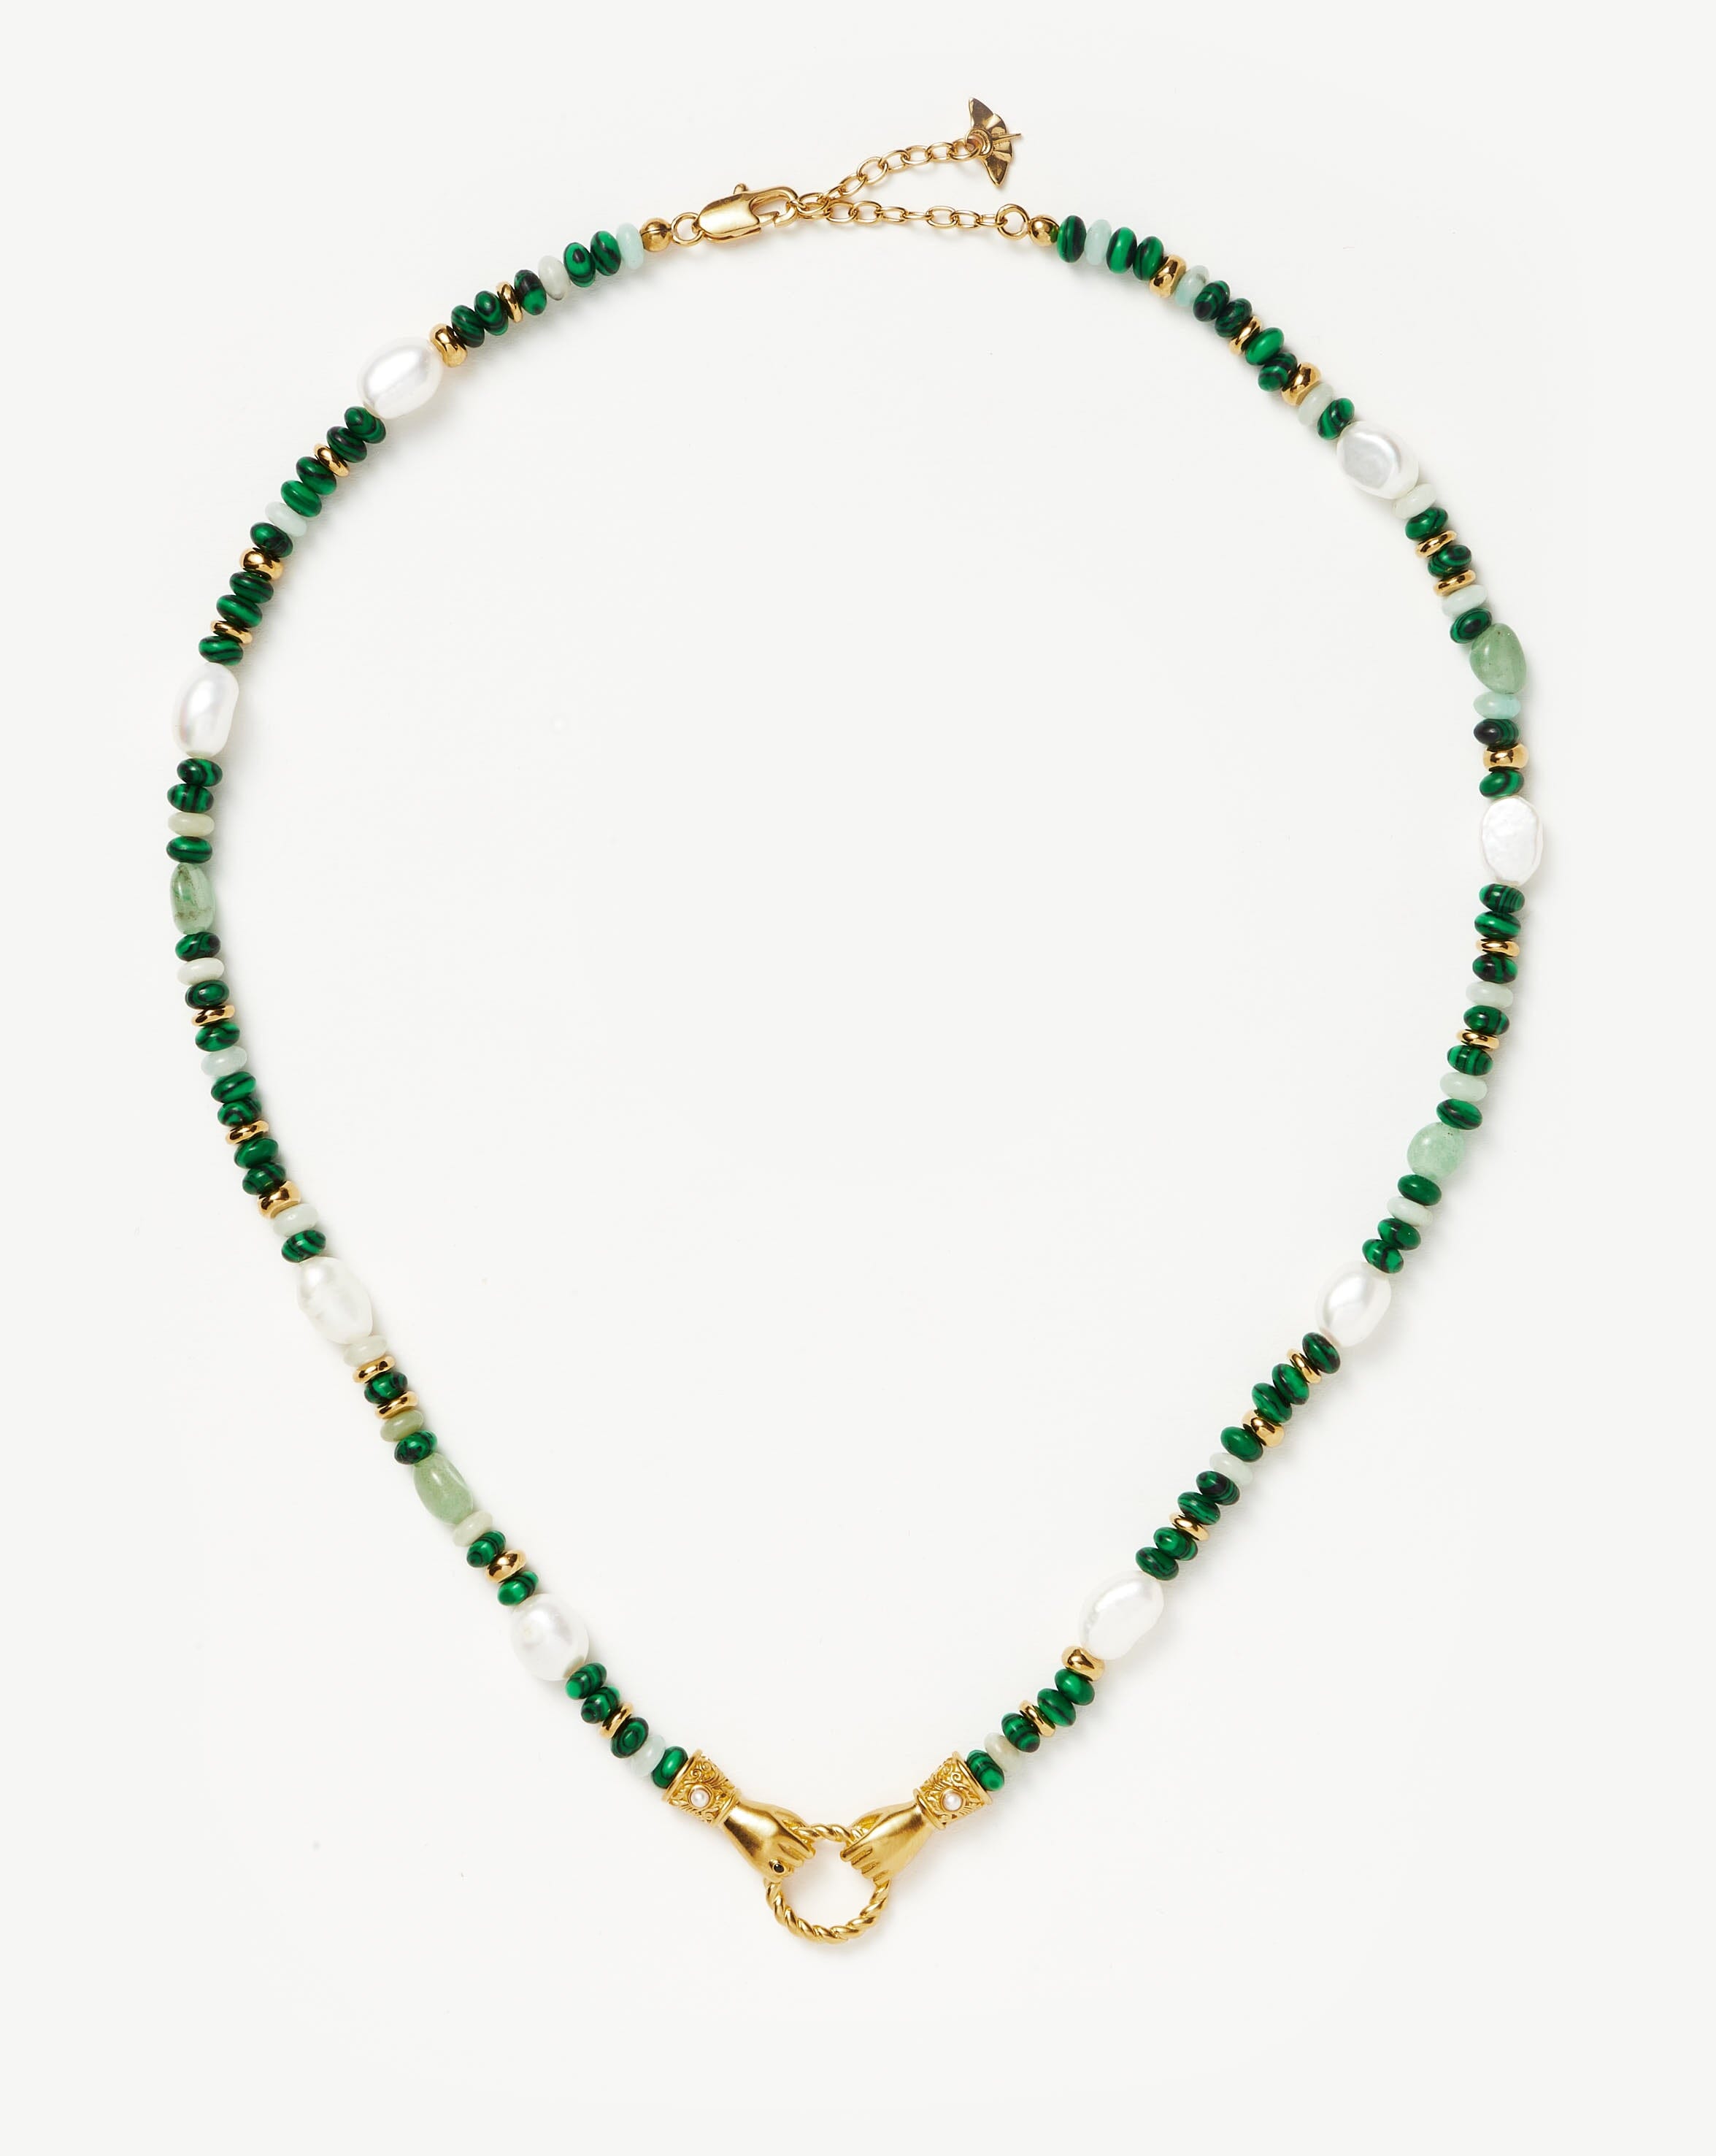 Missoma Harris Reed in Good Hands Beaded Gemstone Necklace | 18ct Gold Plated/Multi Green Gemstone & Pearl